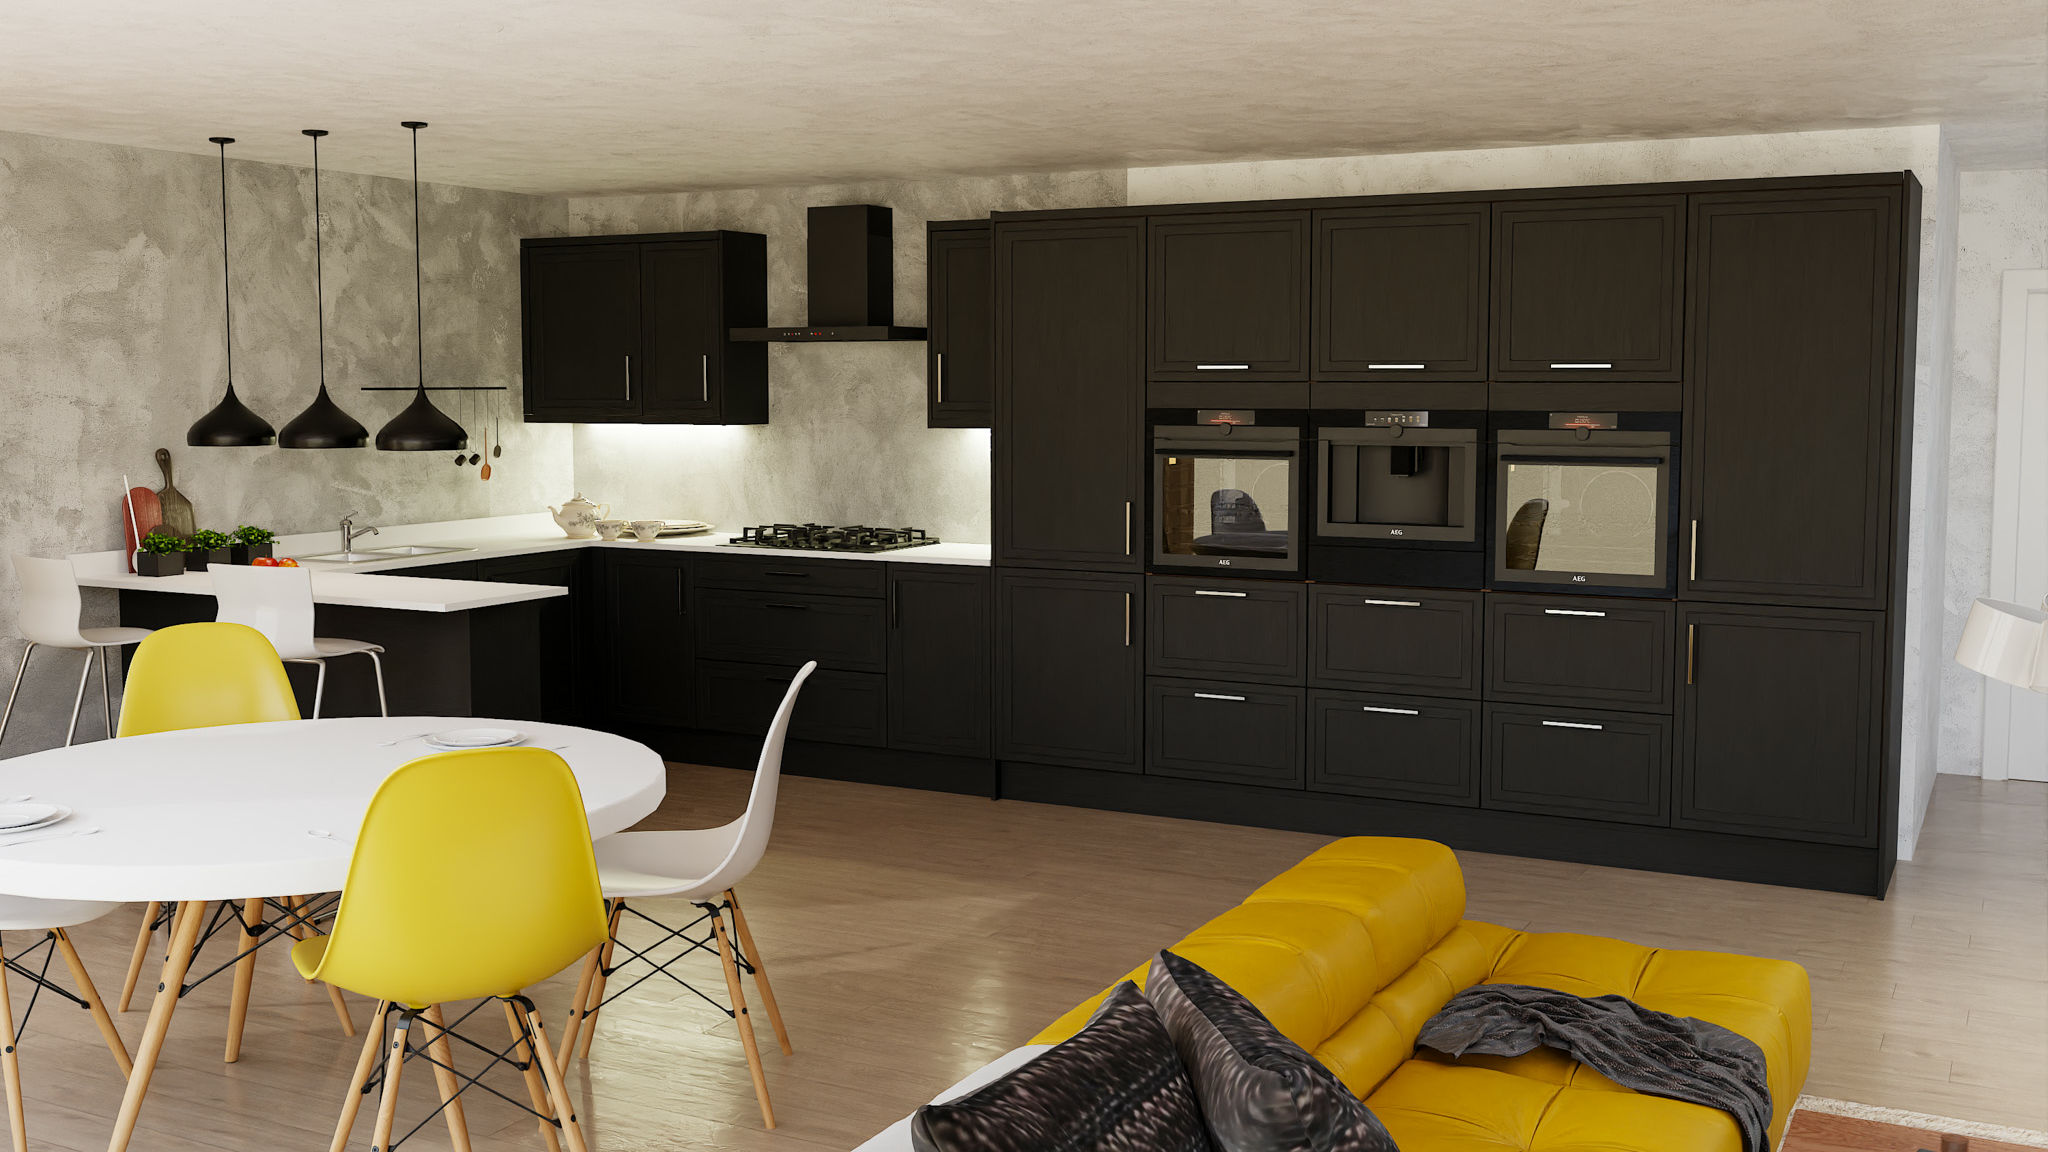 Mock inframe Arrington Cannon Black kitchens styled for a tailored, custom-built look in a chic black shade